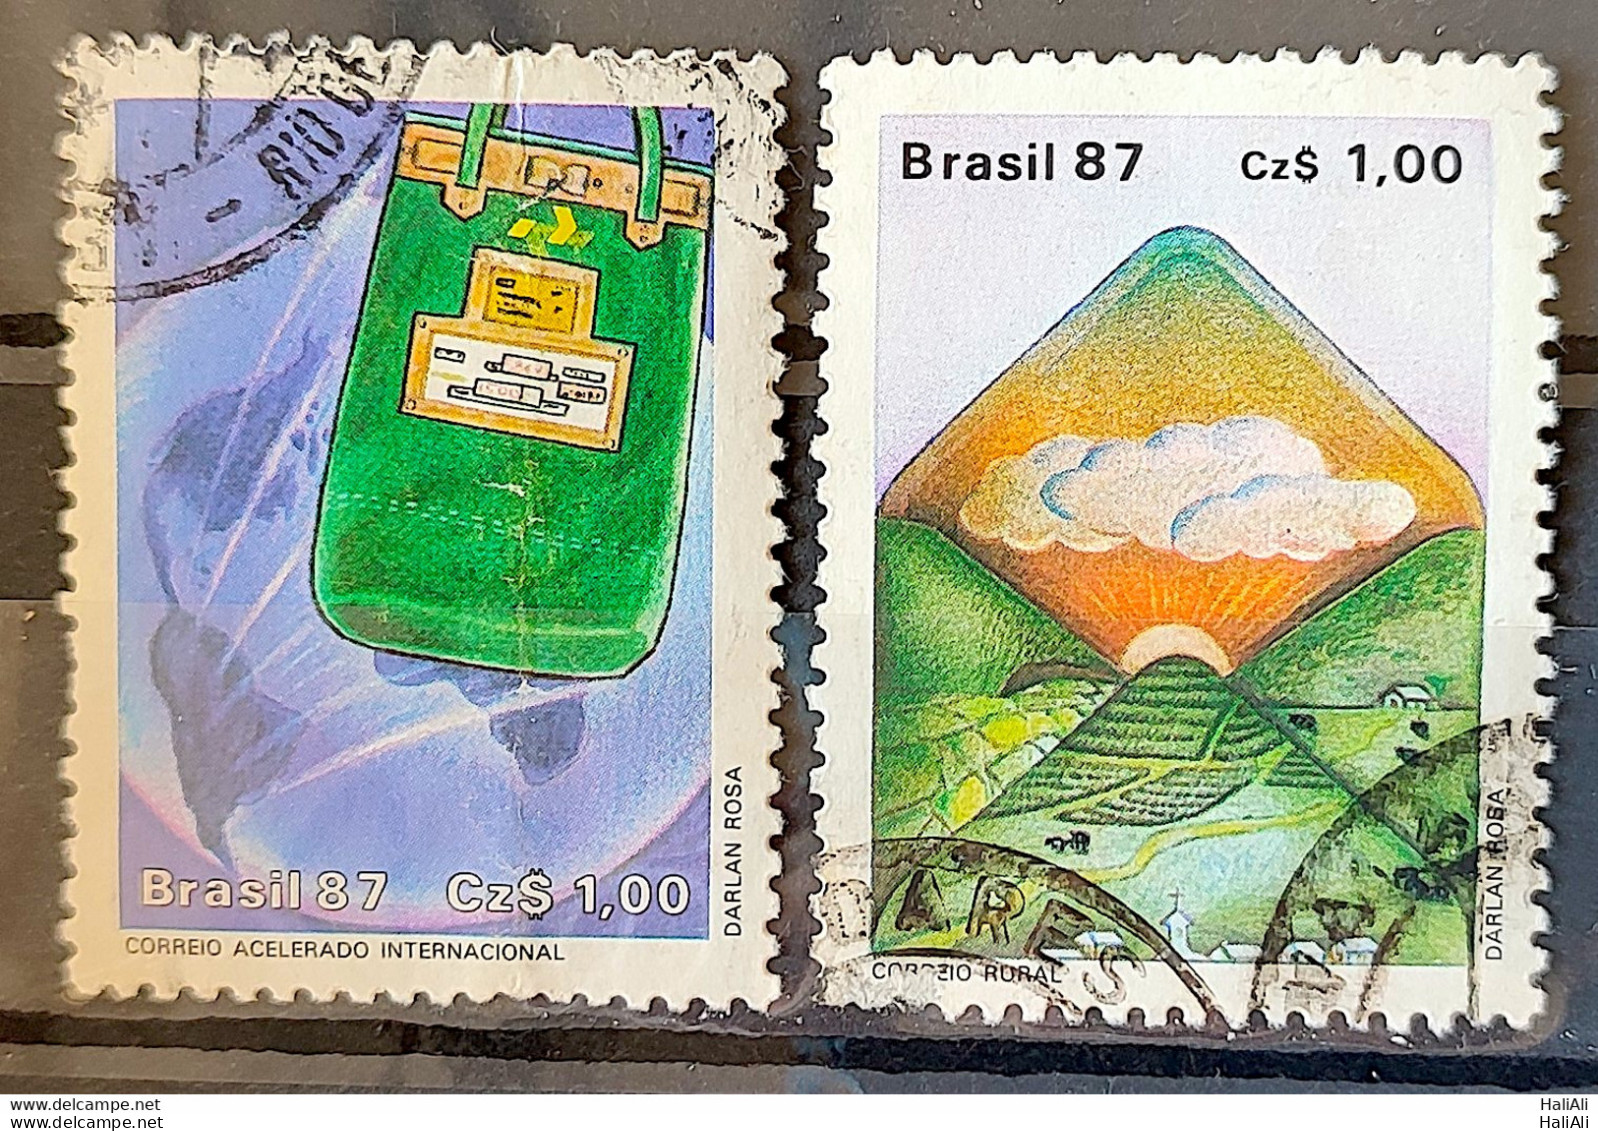 C 1545 Brazil Stamp Postal Service Malote Letter 1987 Complete Series Circulated 5 - Gebraucht